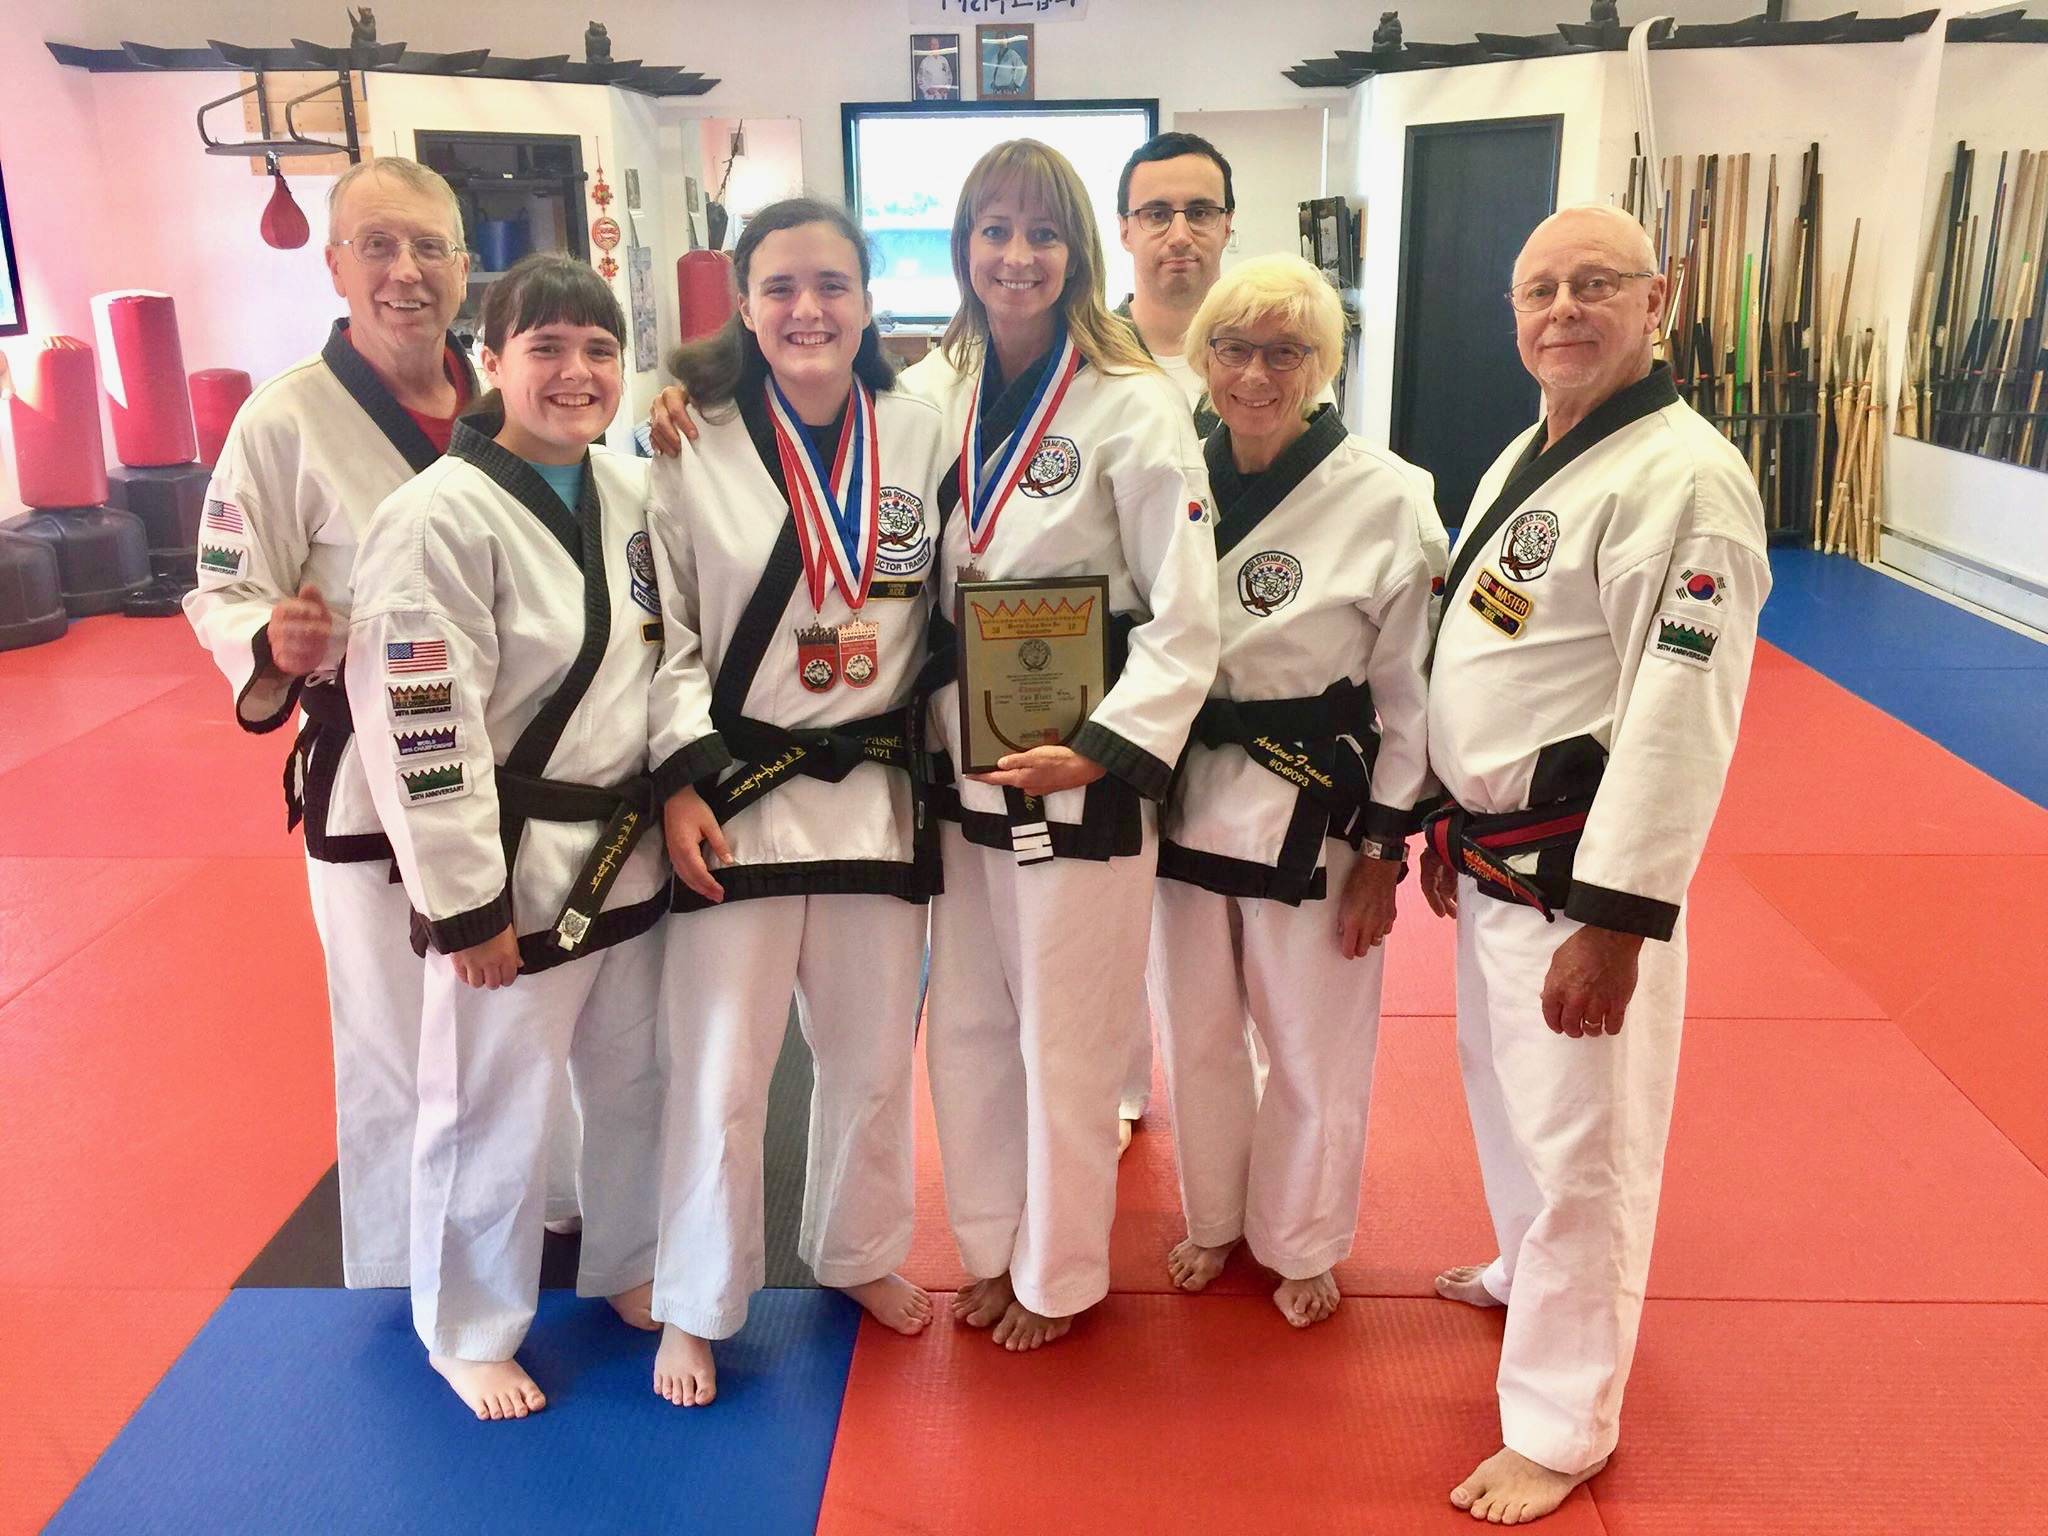 Cierra Brassfield, Edward Welch, Mika Brassfield, Shari Franke, Arlene Franke, Danny MacIntosh and Master Bud Draper pose with their medals and plaques after returning from the World Tang Soo Do Championships on Thursday, Aug. 9, 2018, near Soldotna, Alaska. (Photo by Victoria Petersen/Peninsula Clarion)